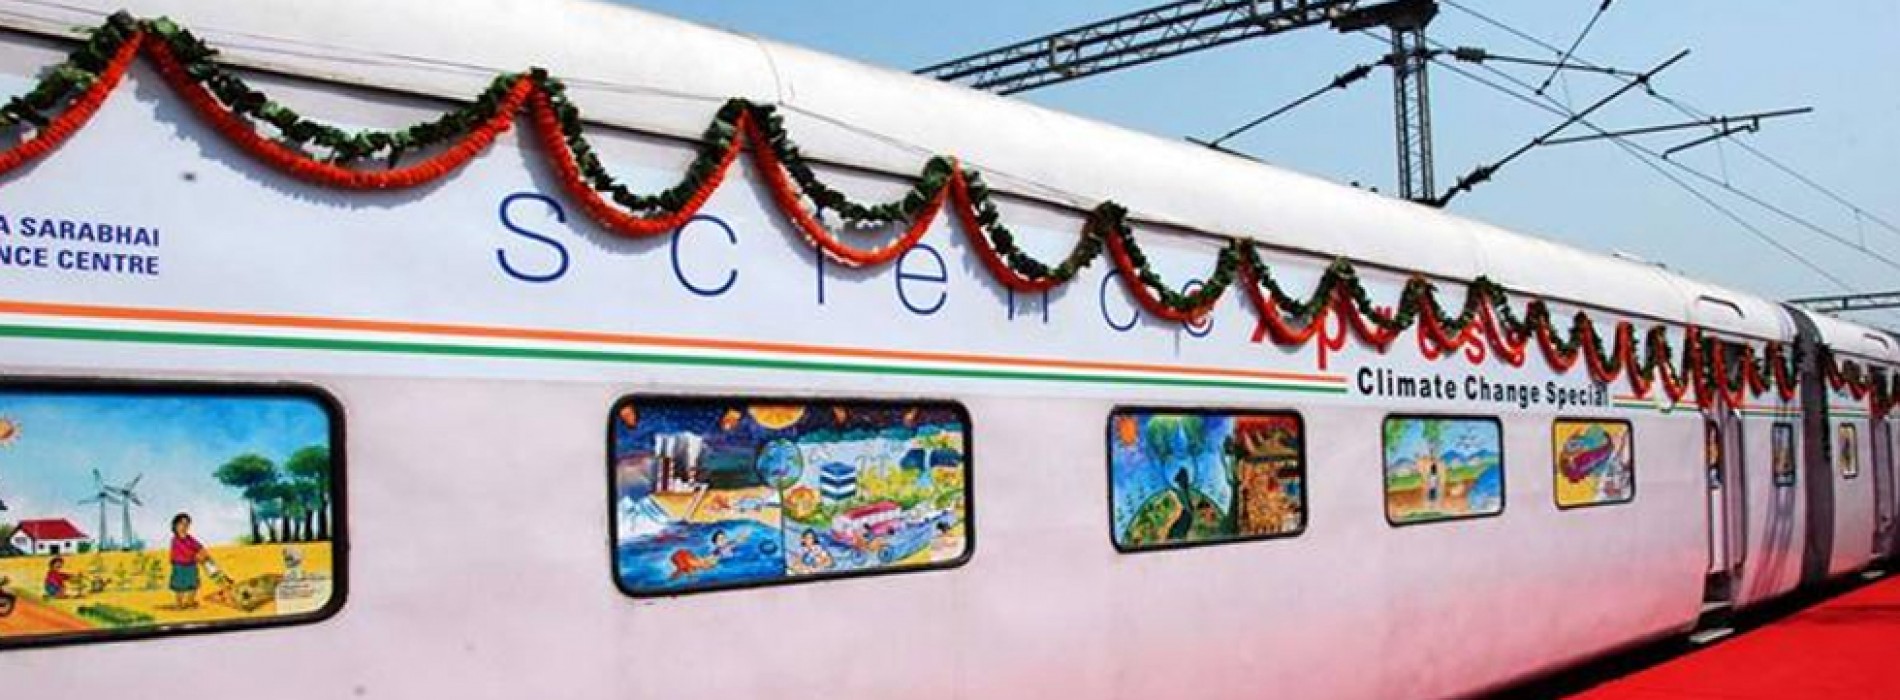 Science Express train to halt at Nagpur from July 30